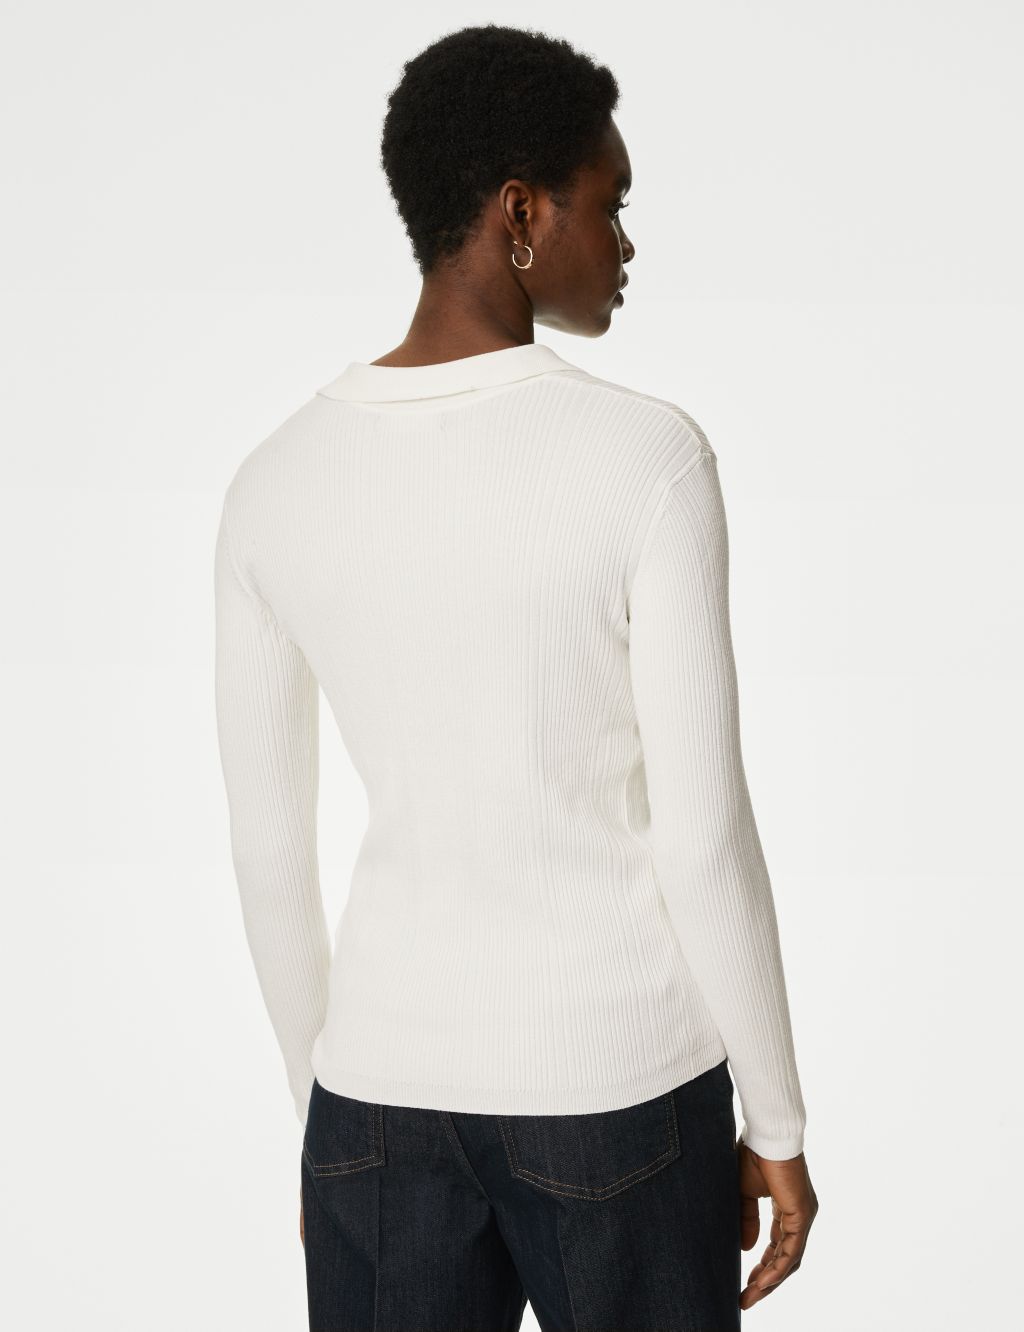 Ribbed Collared Fitted Knitted Top image 5